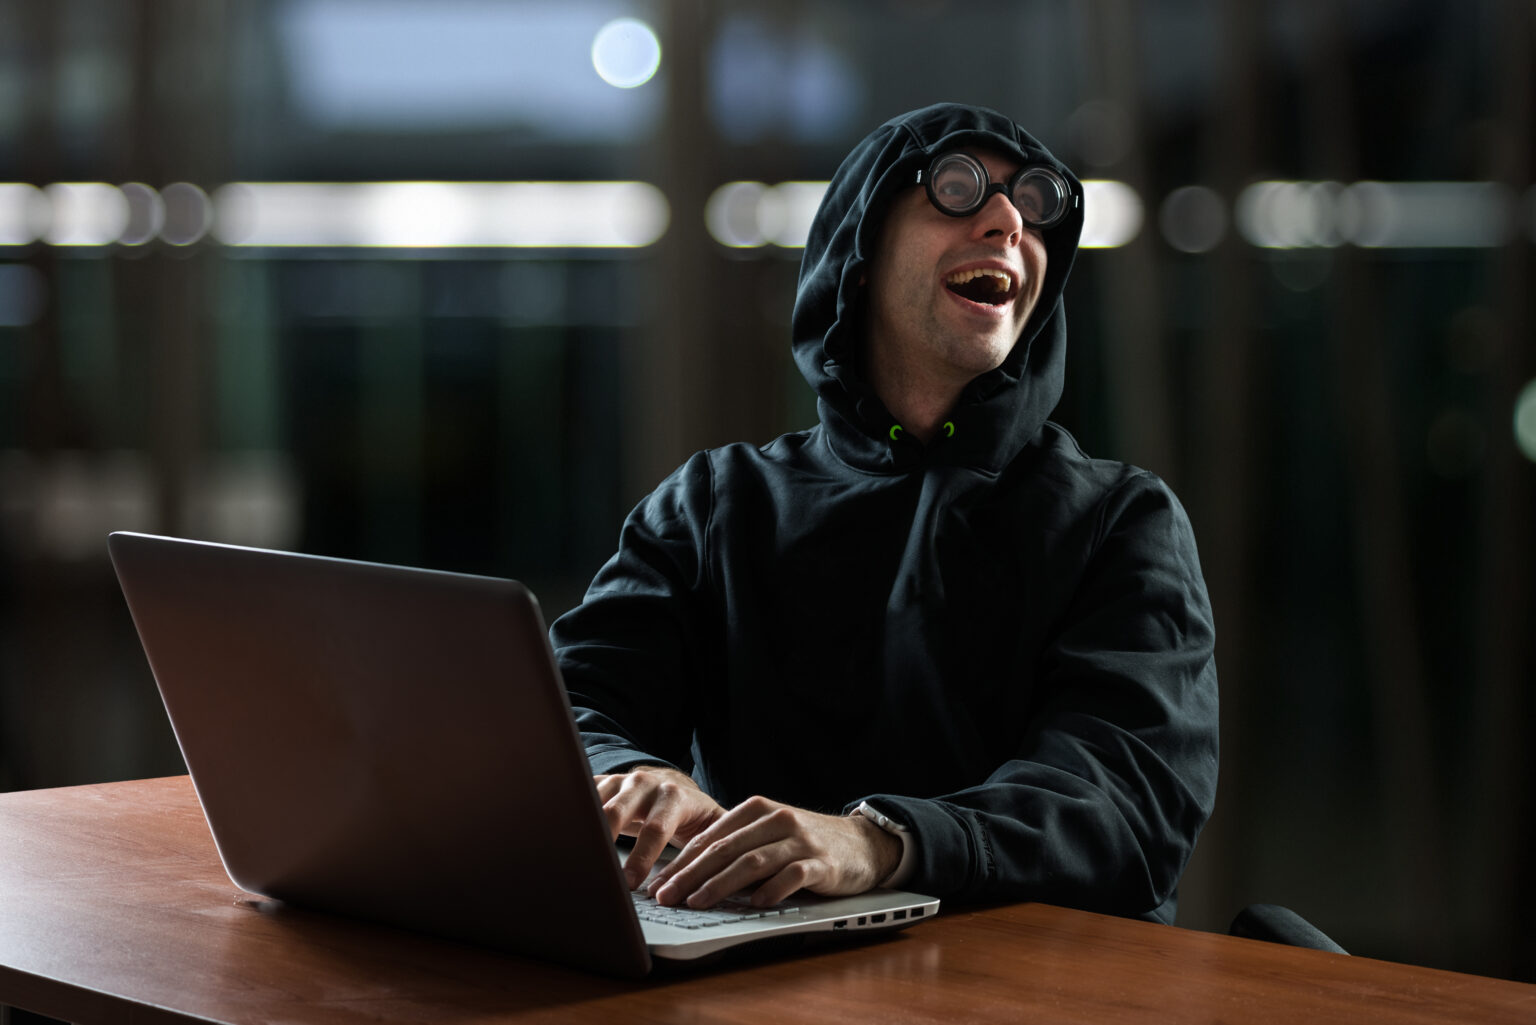 There is a male hacker in front of his computer laughing and happy of what he has done, illustrating Information Security topic